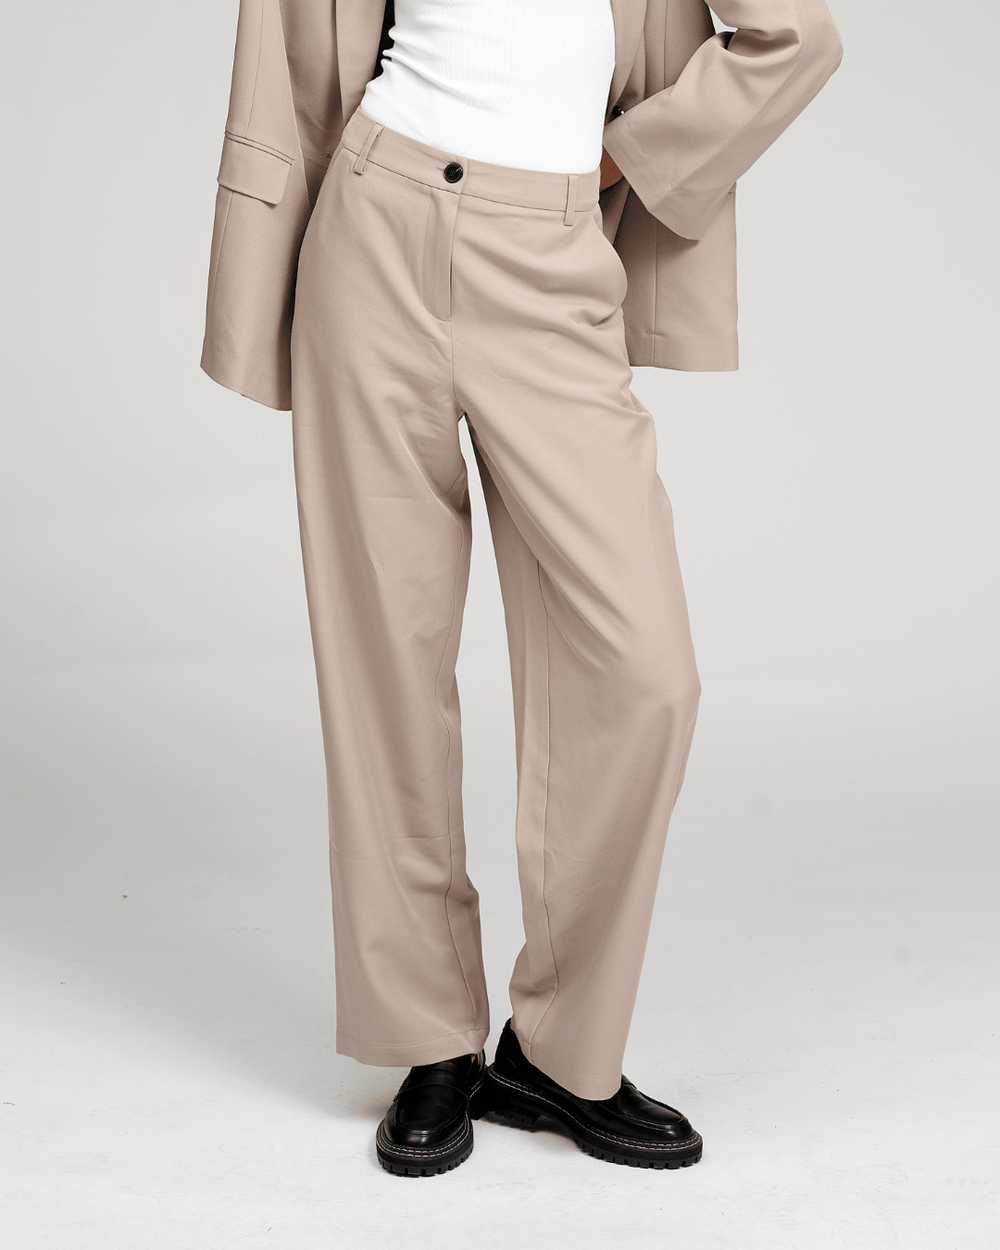 5. Tailored trousers for sophisticated elegance